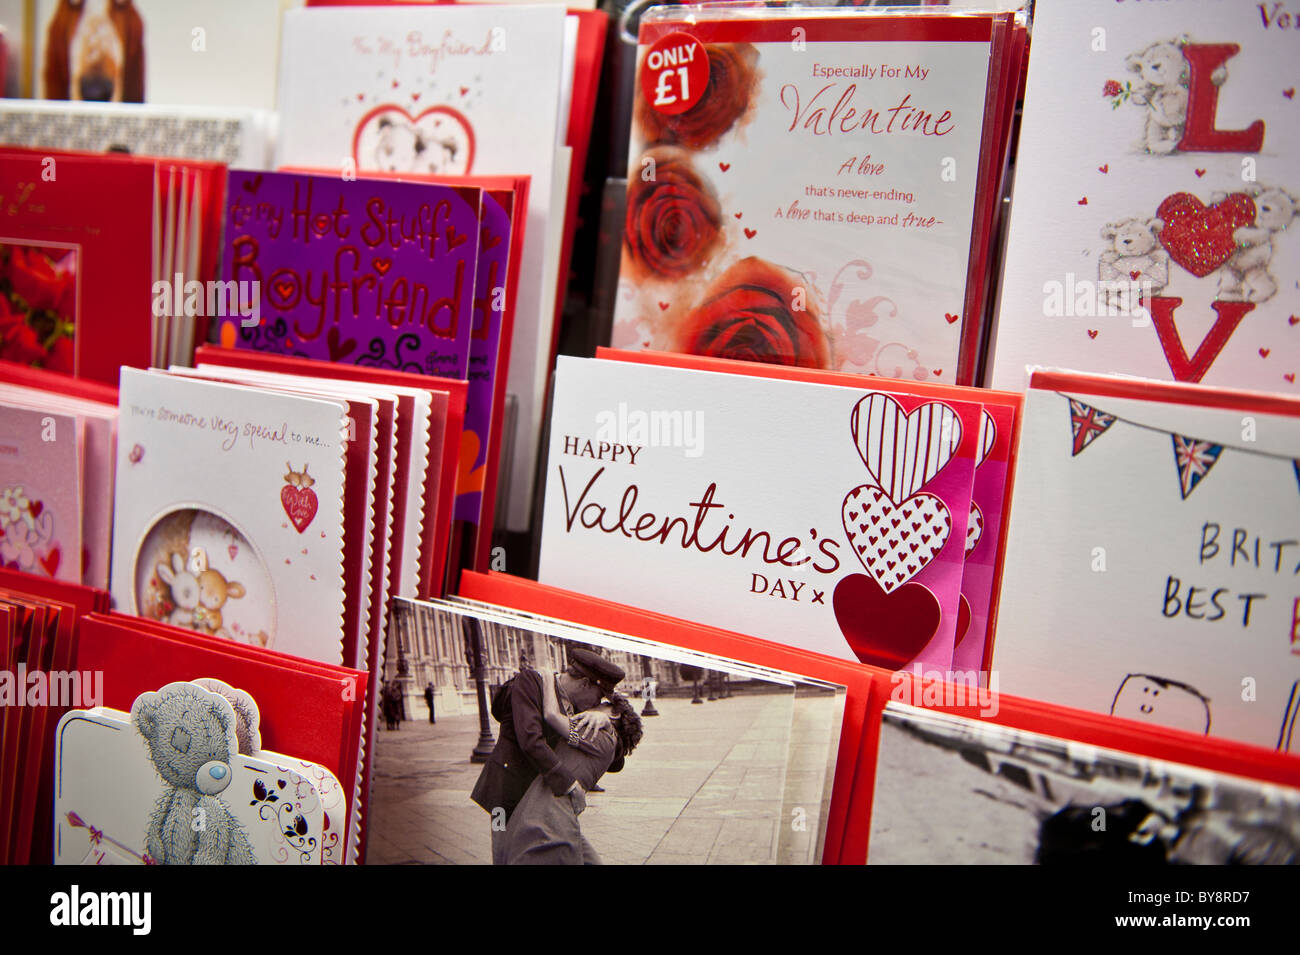 Racks of valentine day cards on sale at a branch of W H Smith, UK Stock Photo